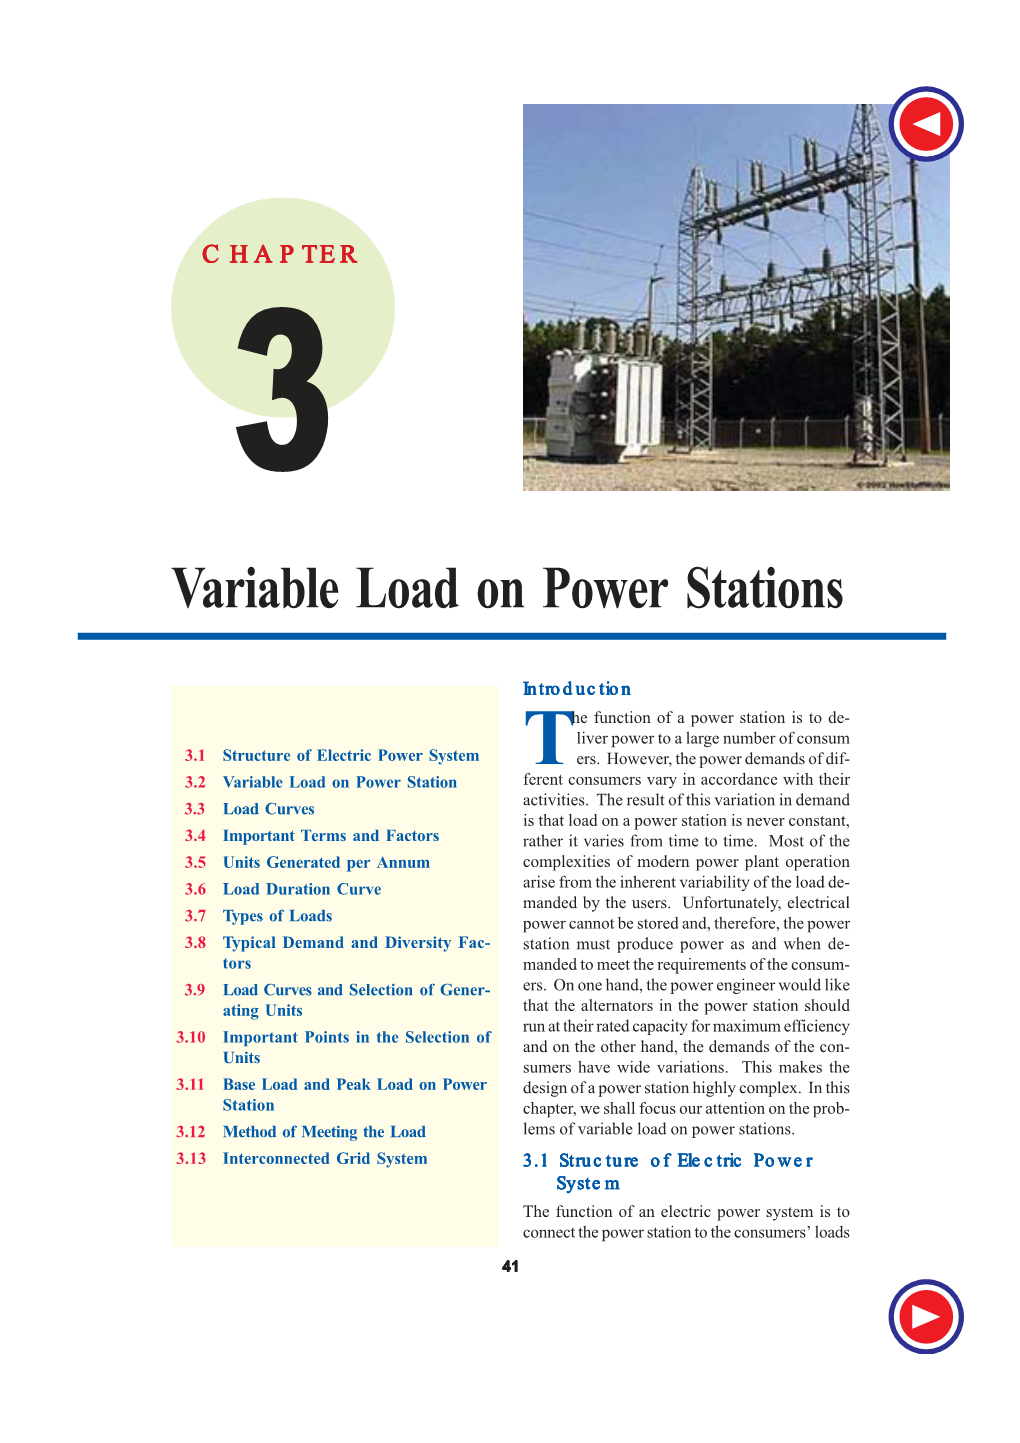 Variable Load on Power Stations